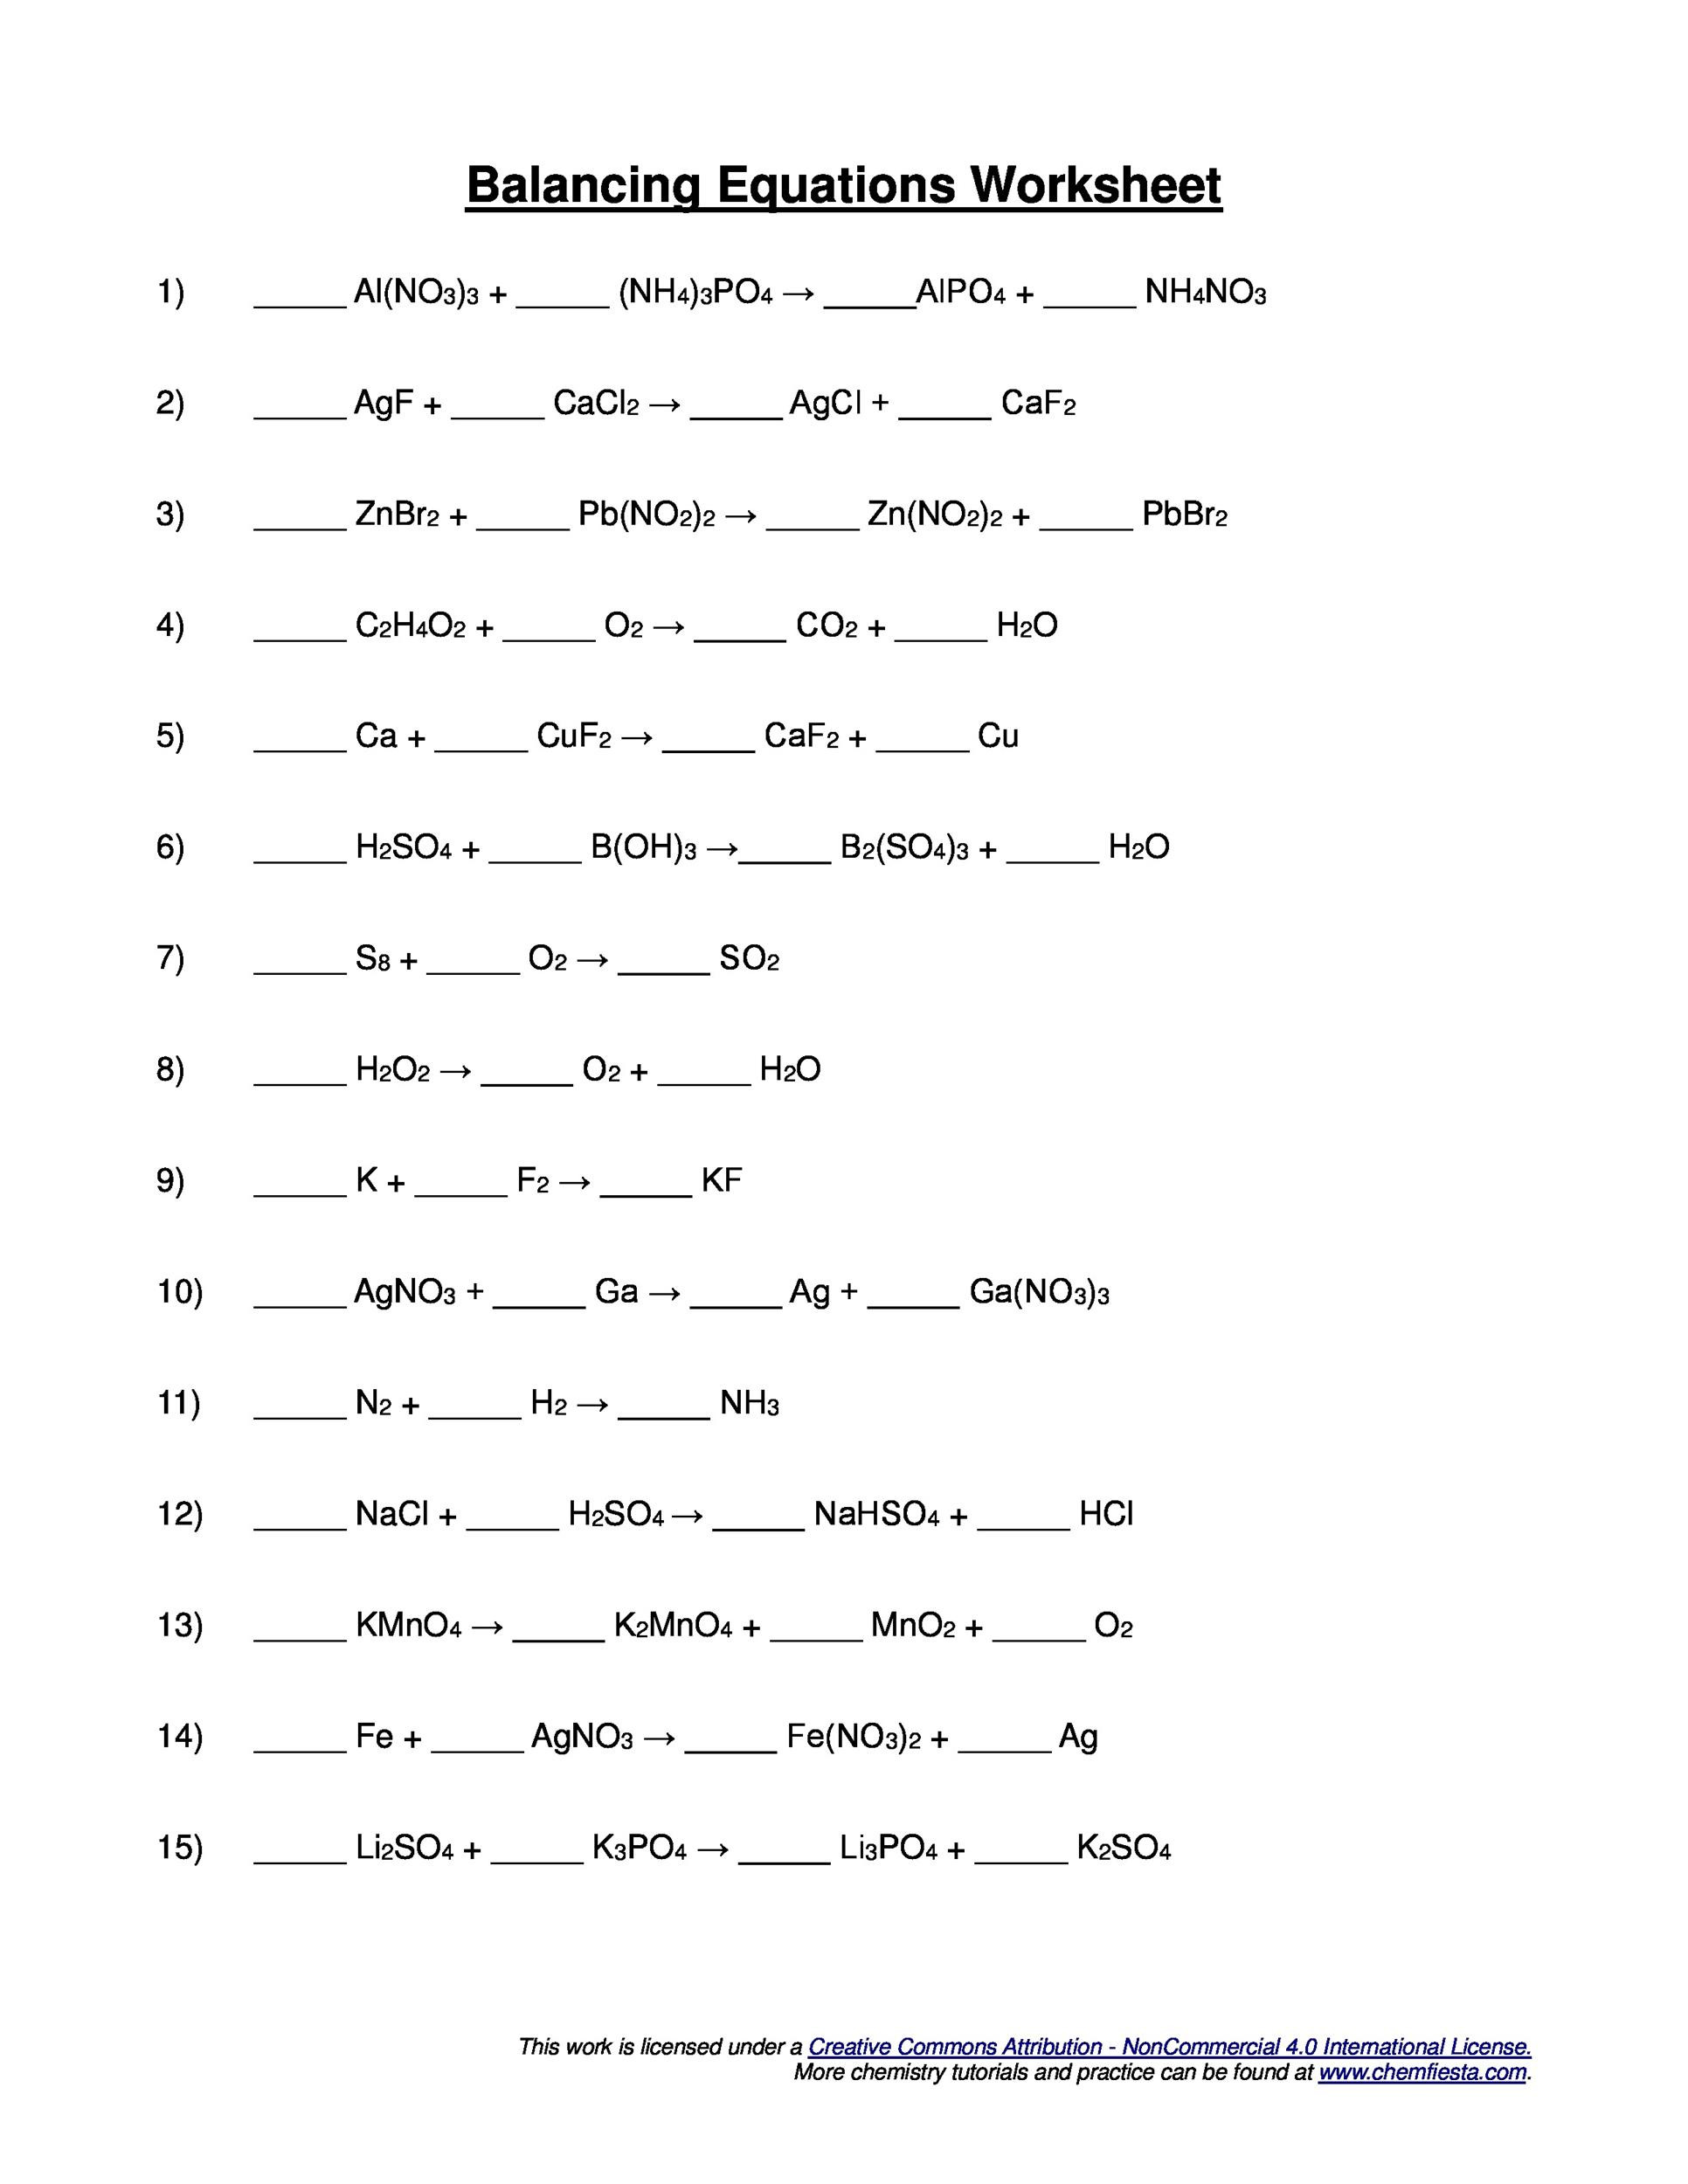 Balancing Equation Worksheet with Answers 49 Balancing Chemical Equations Worksheets [with Answers]